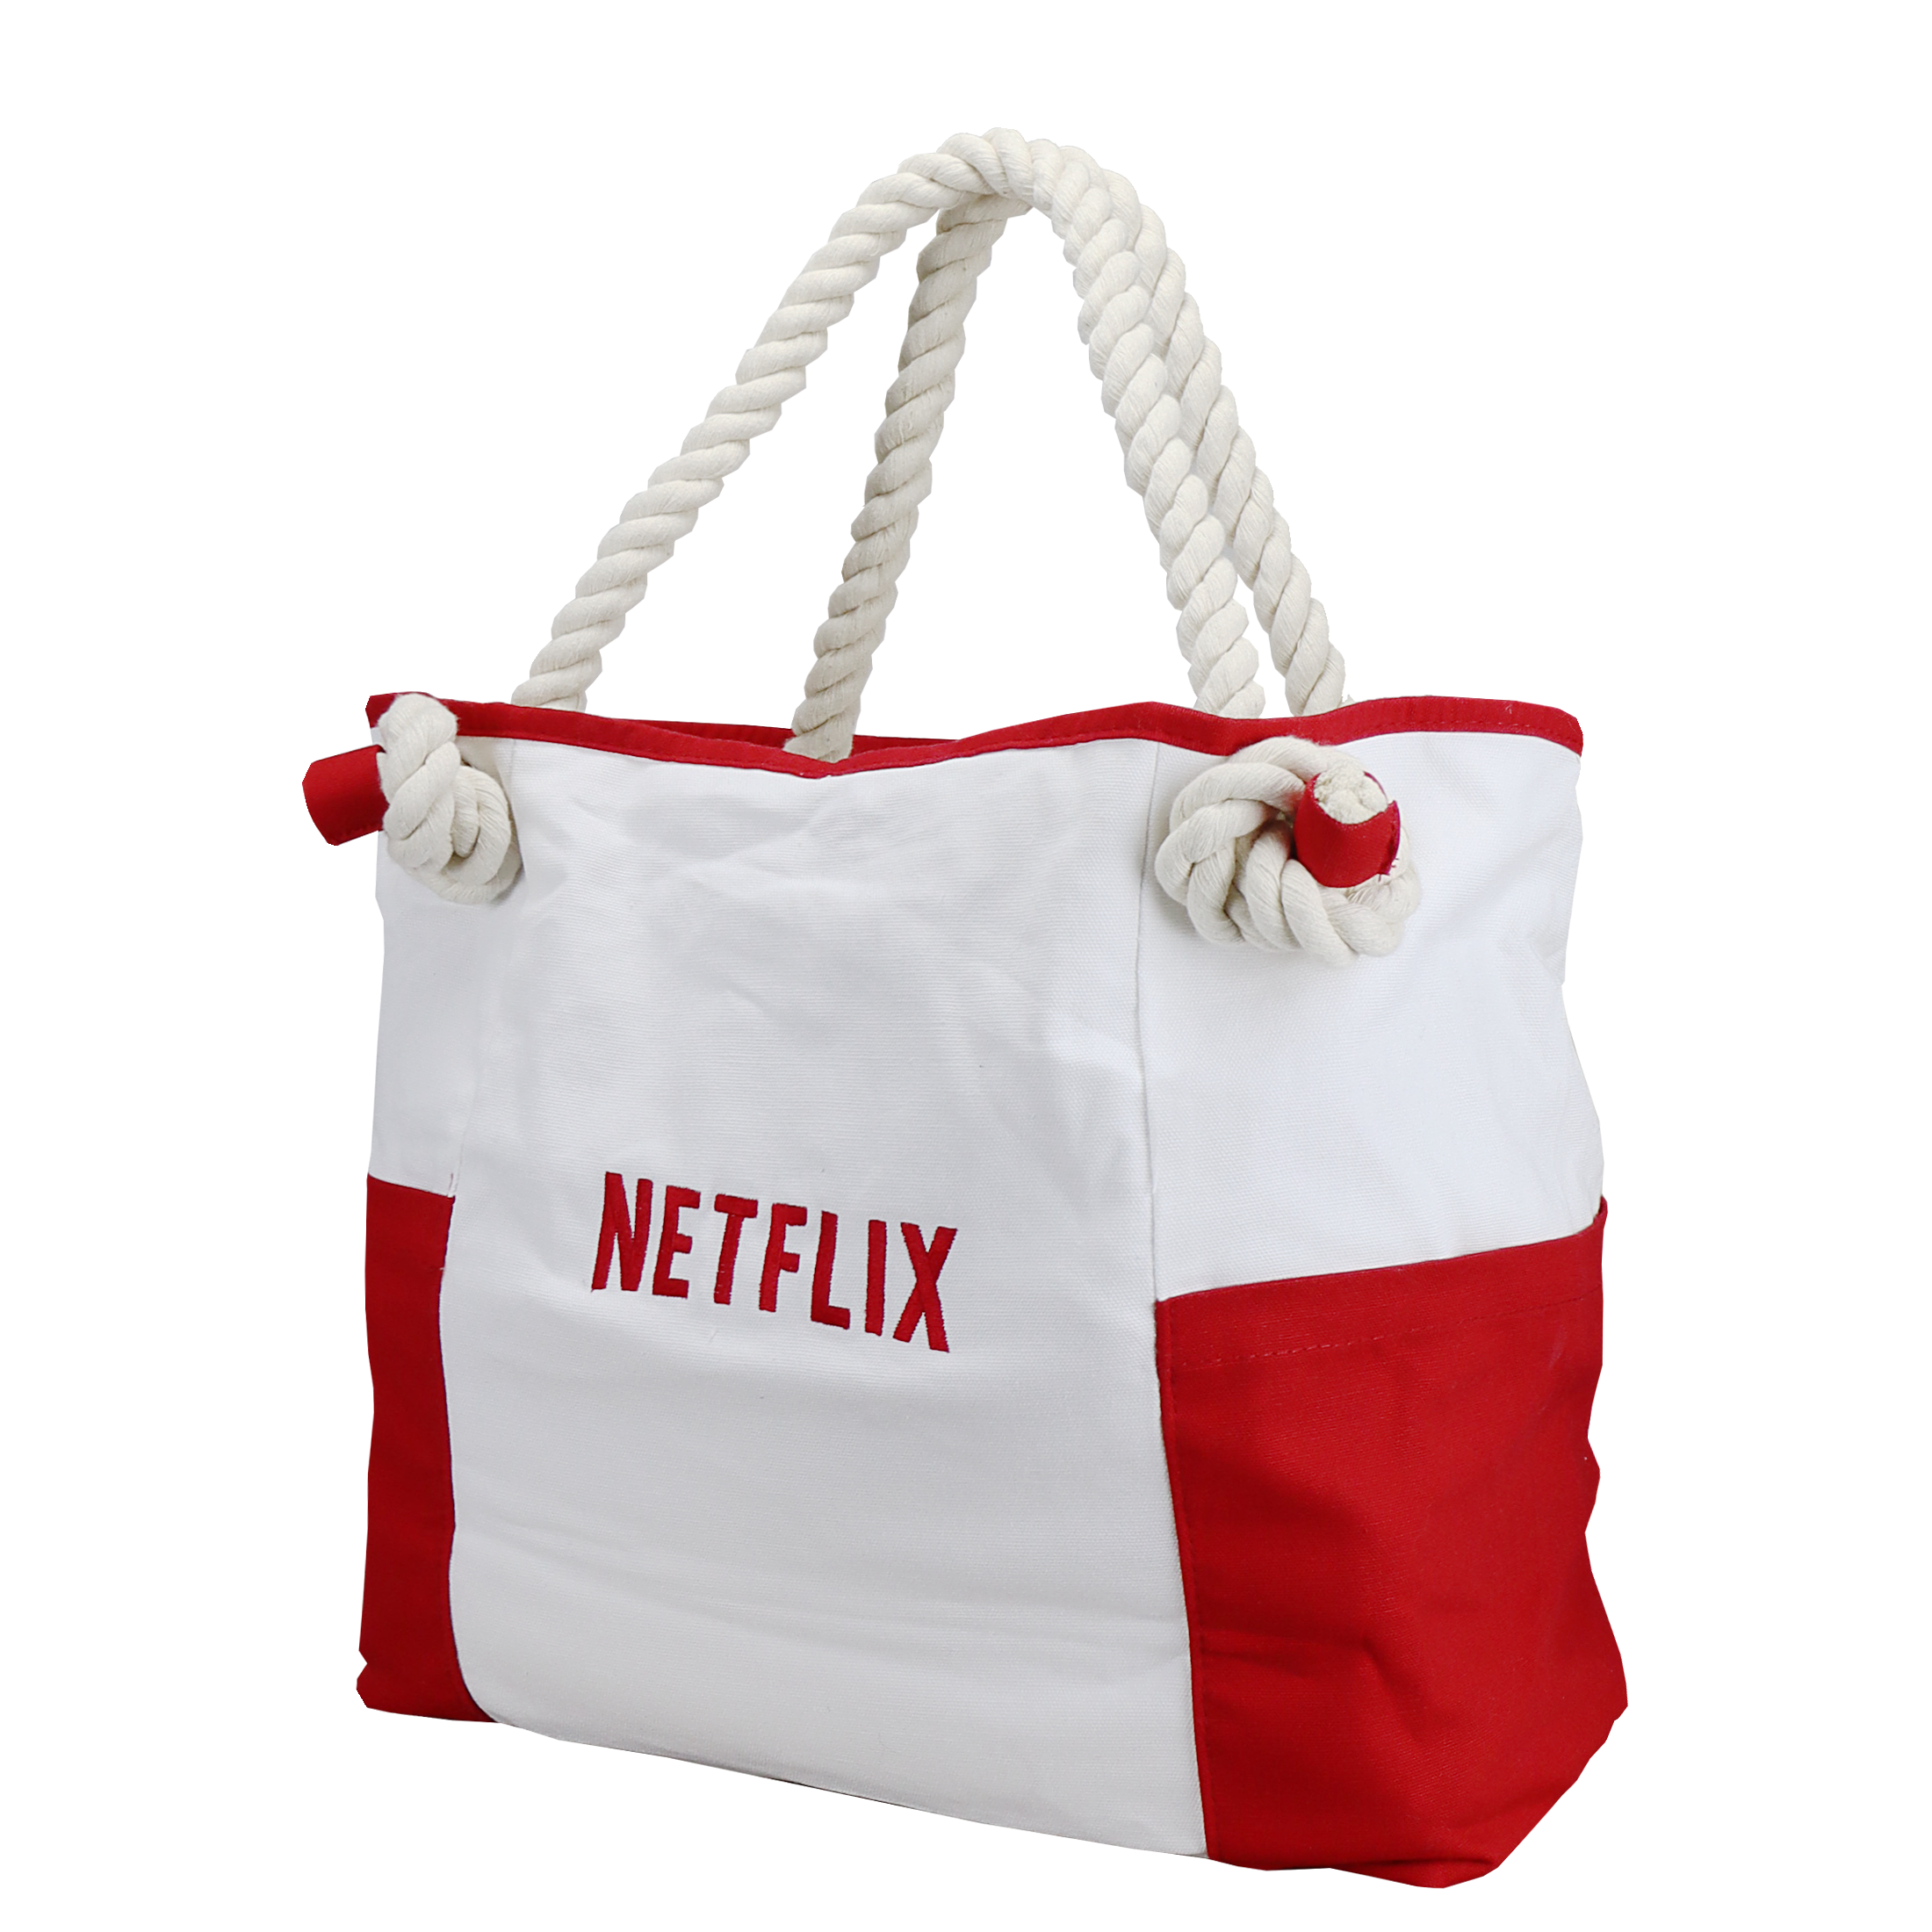 promotional beach bags